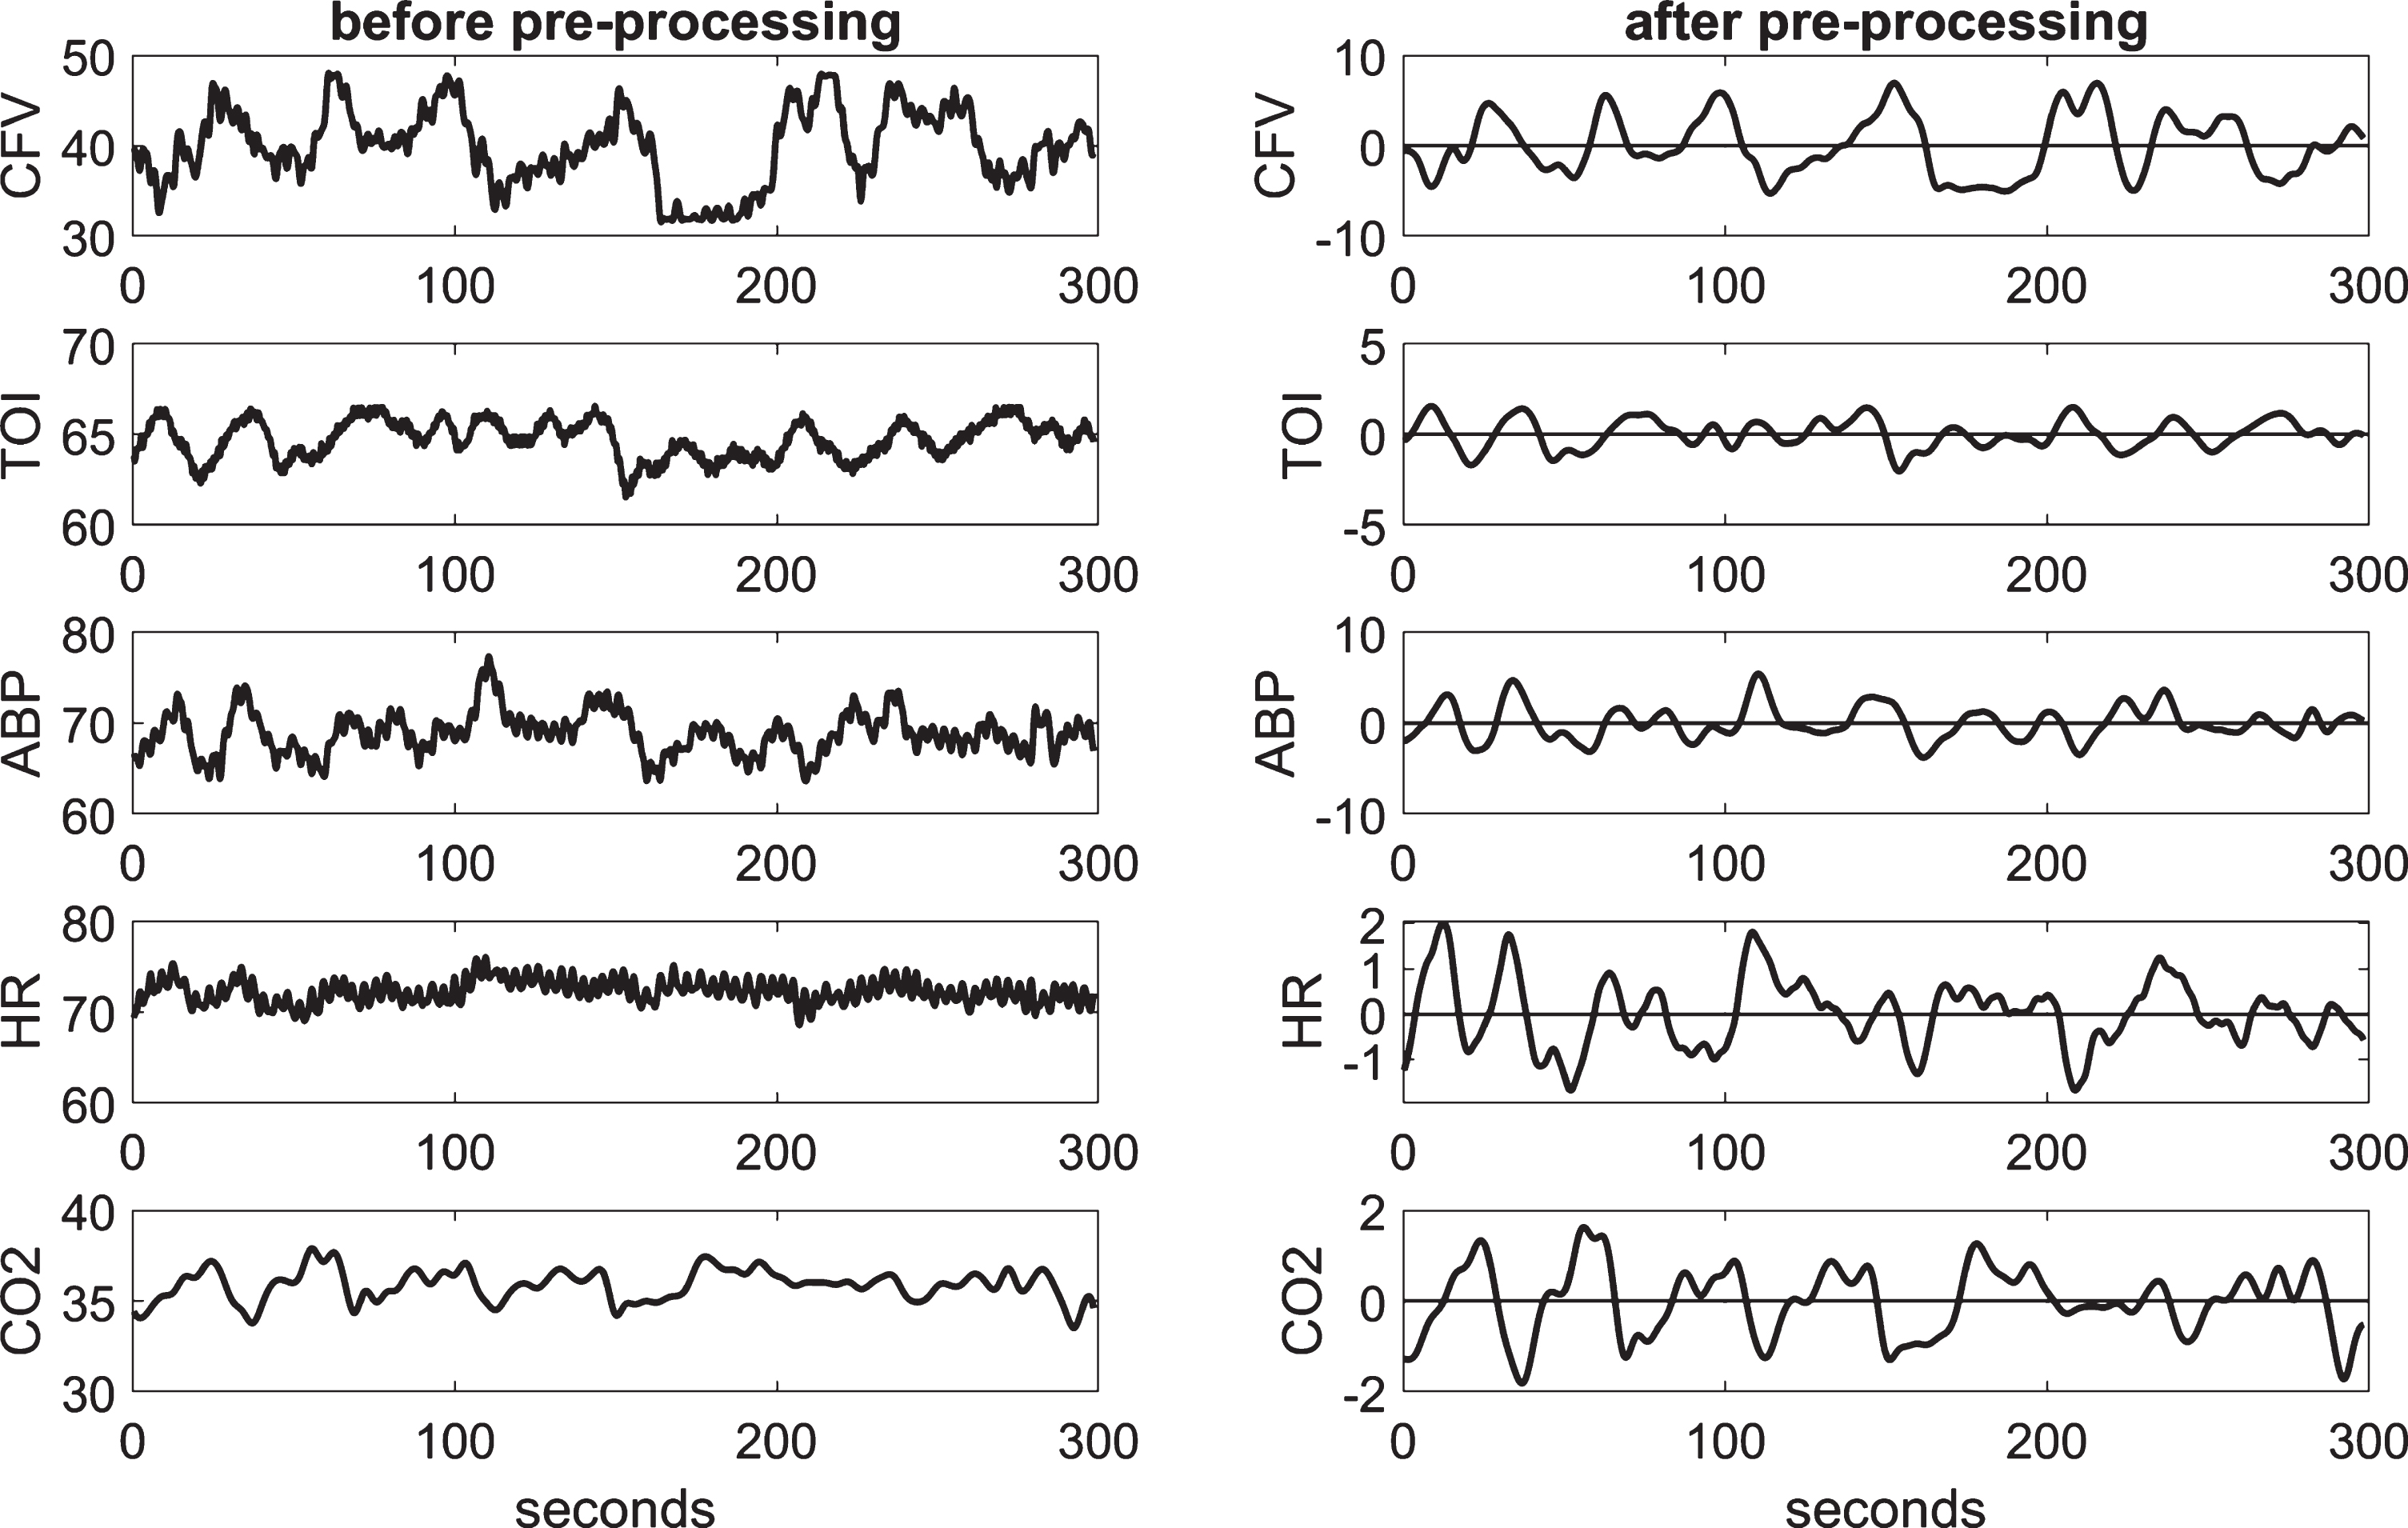 Illustrative time-series data over 5 min for one control subject, representing beat-to-beat spontaneous variations of CFV (top panel), TOI (2nd panel), ABP (3rd panel), HR (4th panel), and CO2 (bottom panel), before (left column) and after (right column) pre-processing. The units are: cm/s for CFV, % for TOI, beats/min for HR, and mmHg for ABP and CO2.